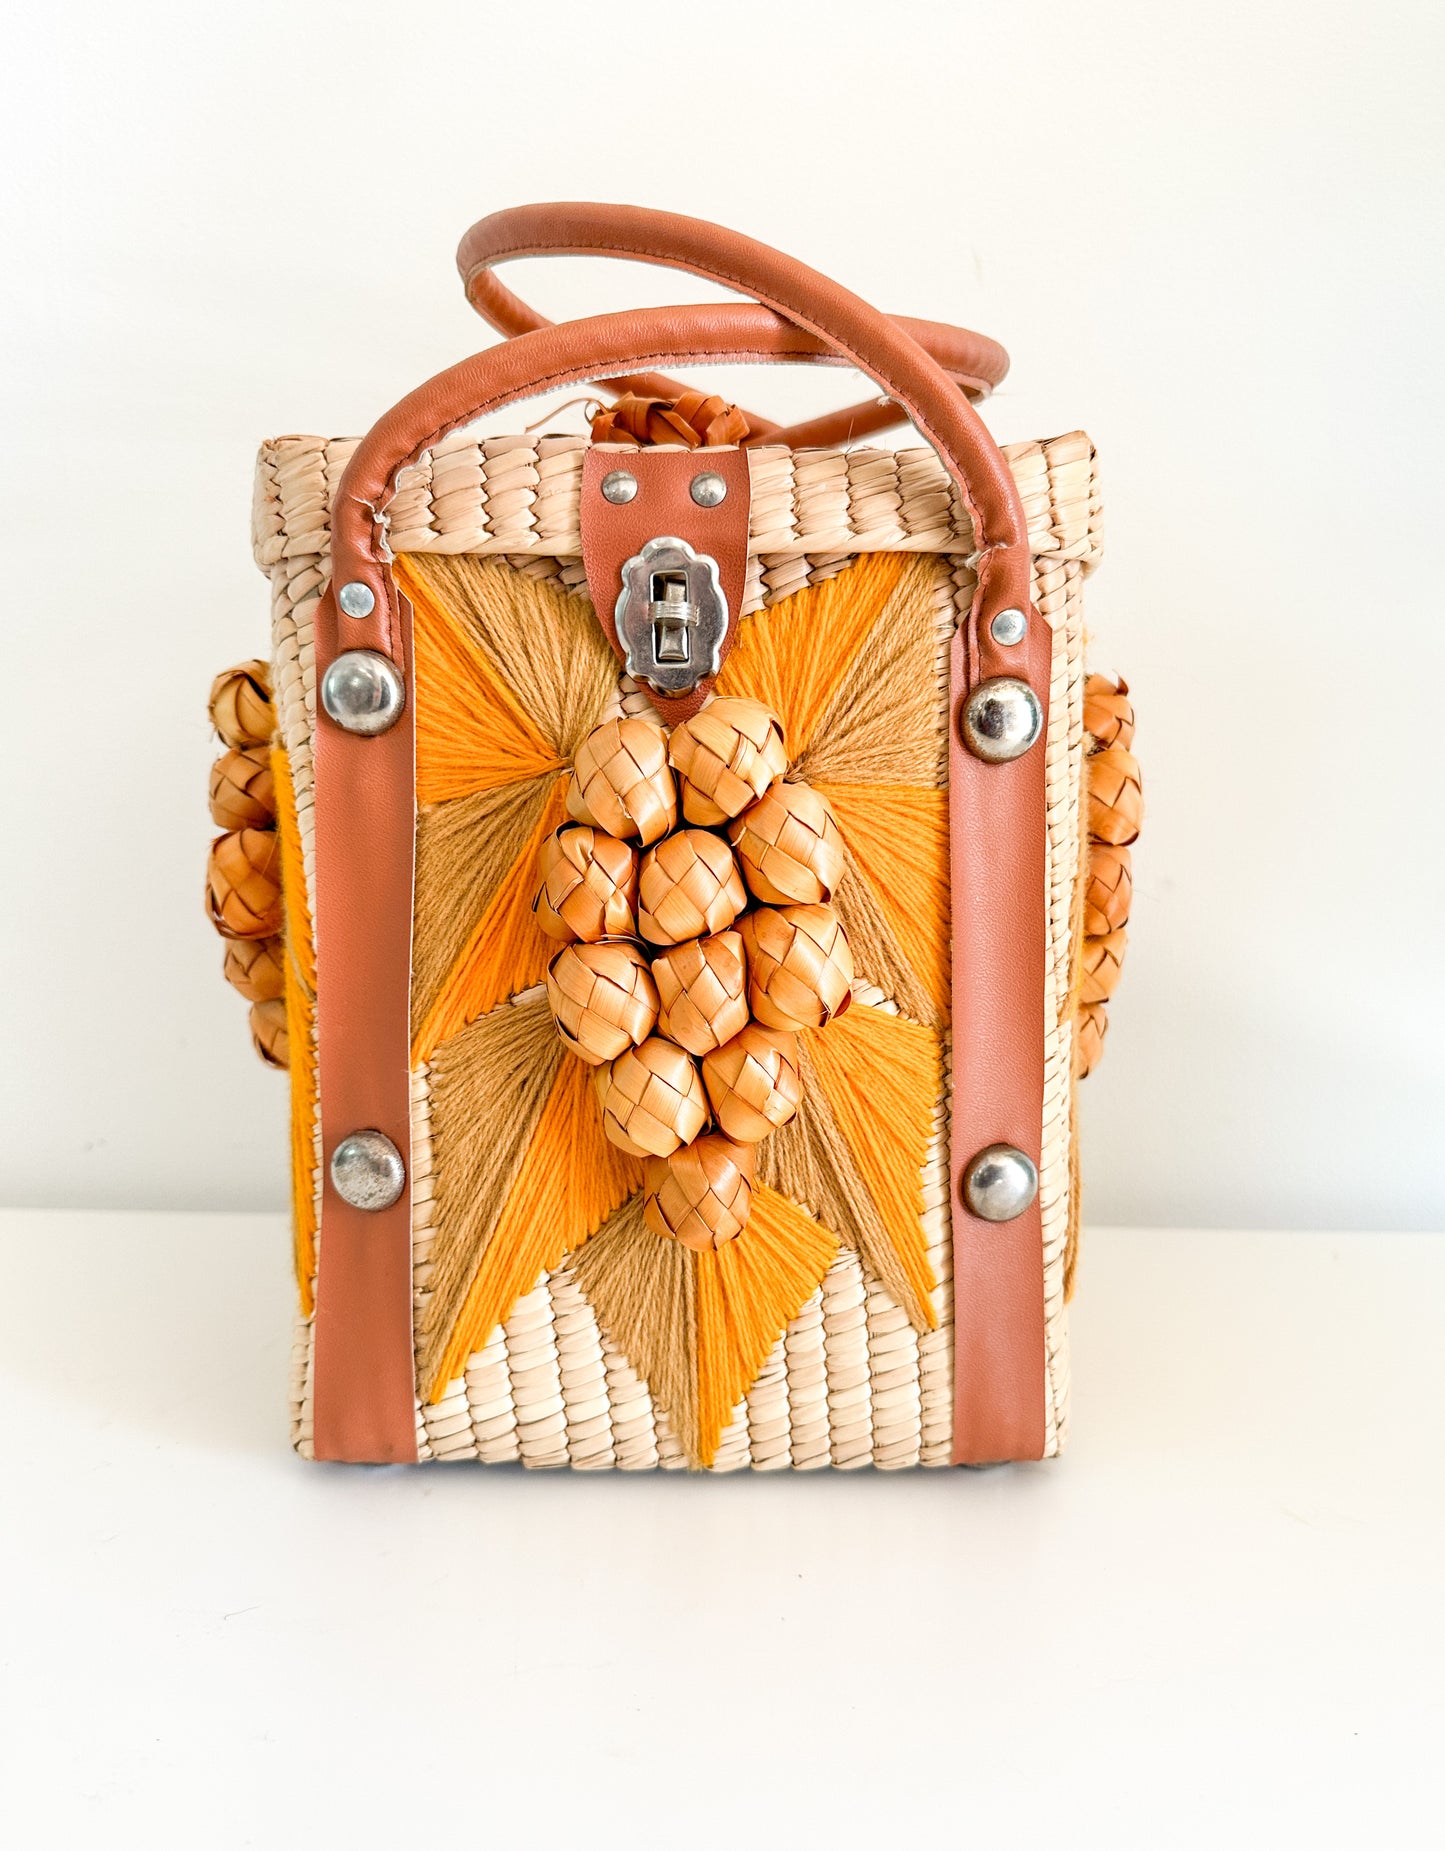 Vintage Wicker Woven Bag with Leatherette details.